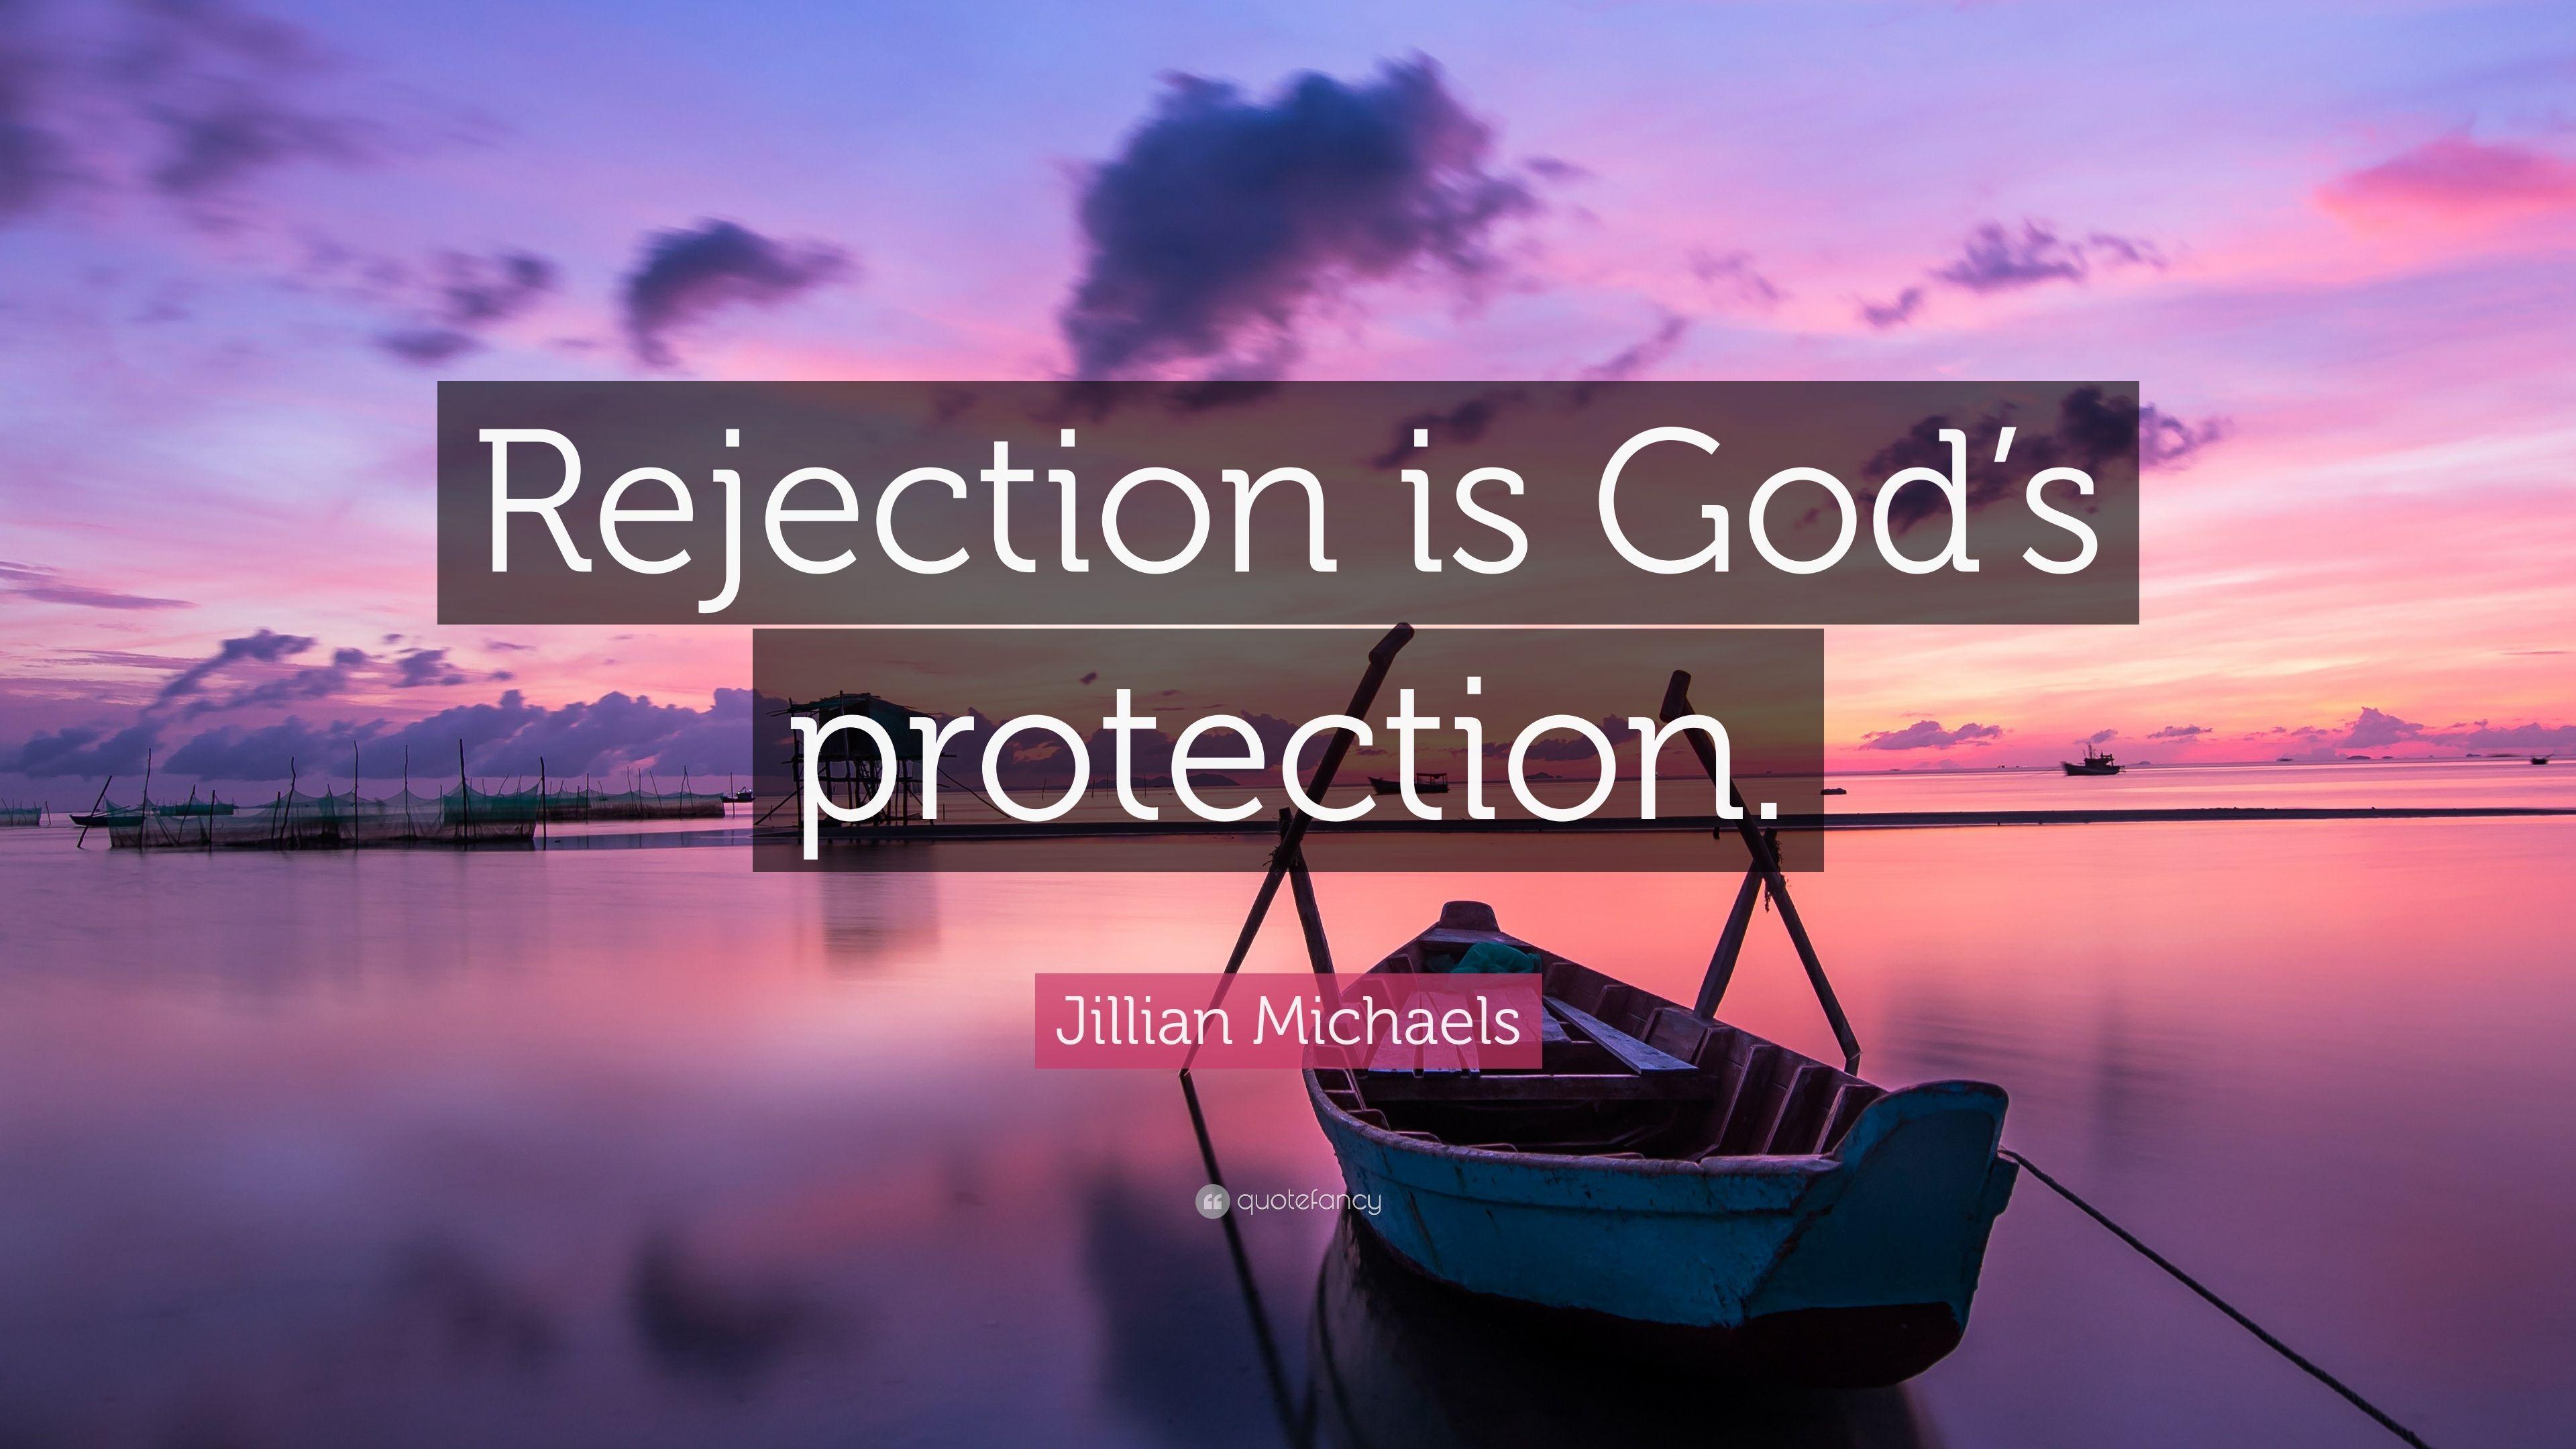 Jillian Michaels Quote: “Rejection is God's protection.” 12